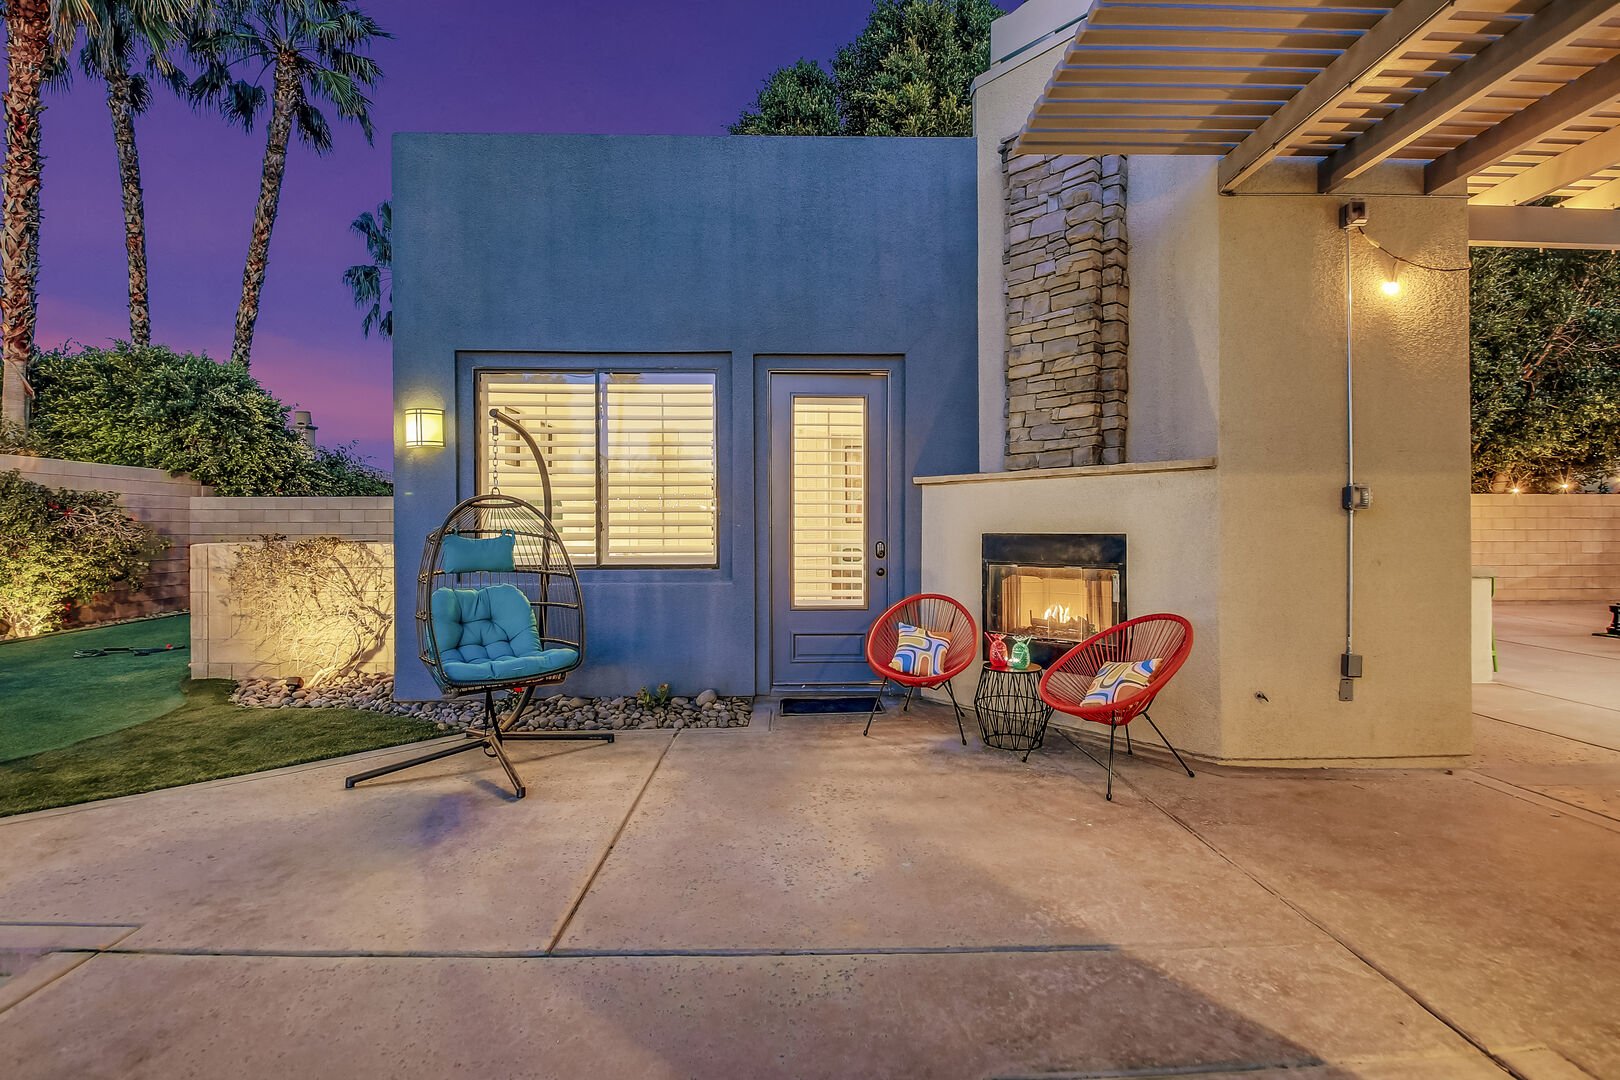 Enjoy the outdoor fireplace located just outside the Casita Suite 3.